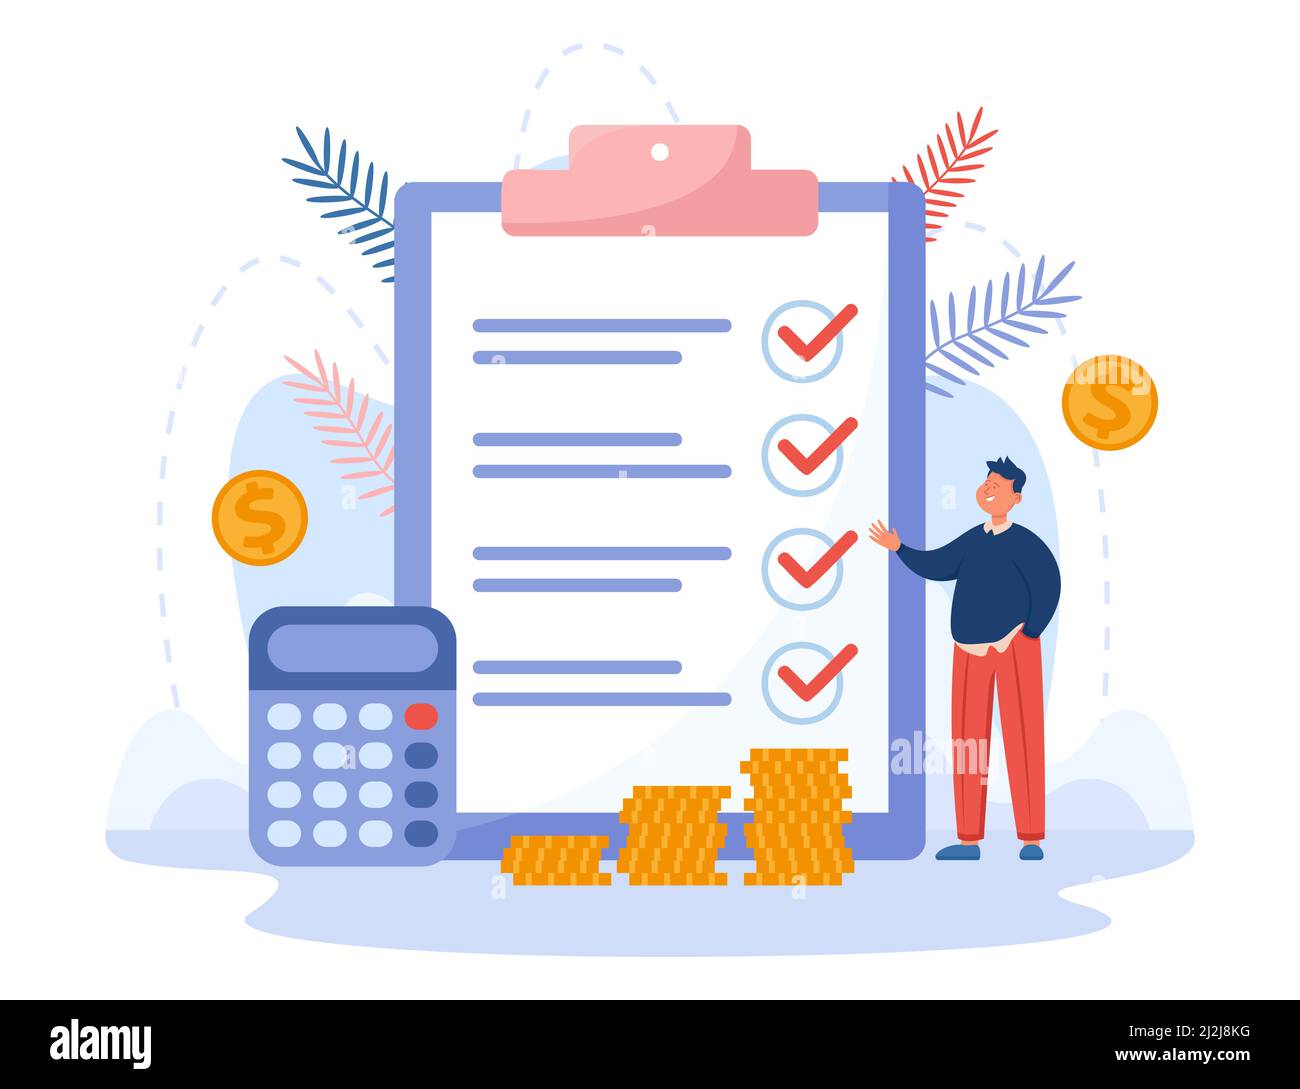 Businessman standing next to business document and calculator. Man planning budget of company flat vector illustration. Finances, taxes concept for ba Stock Vector